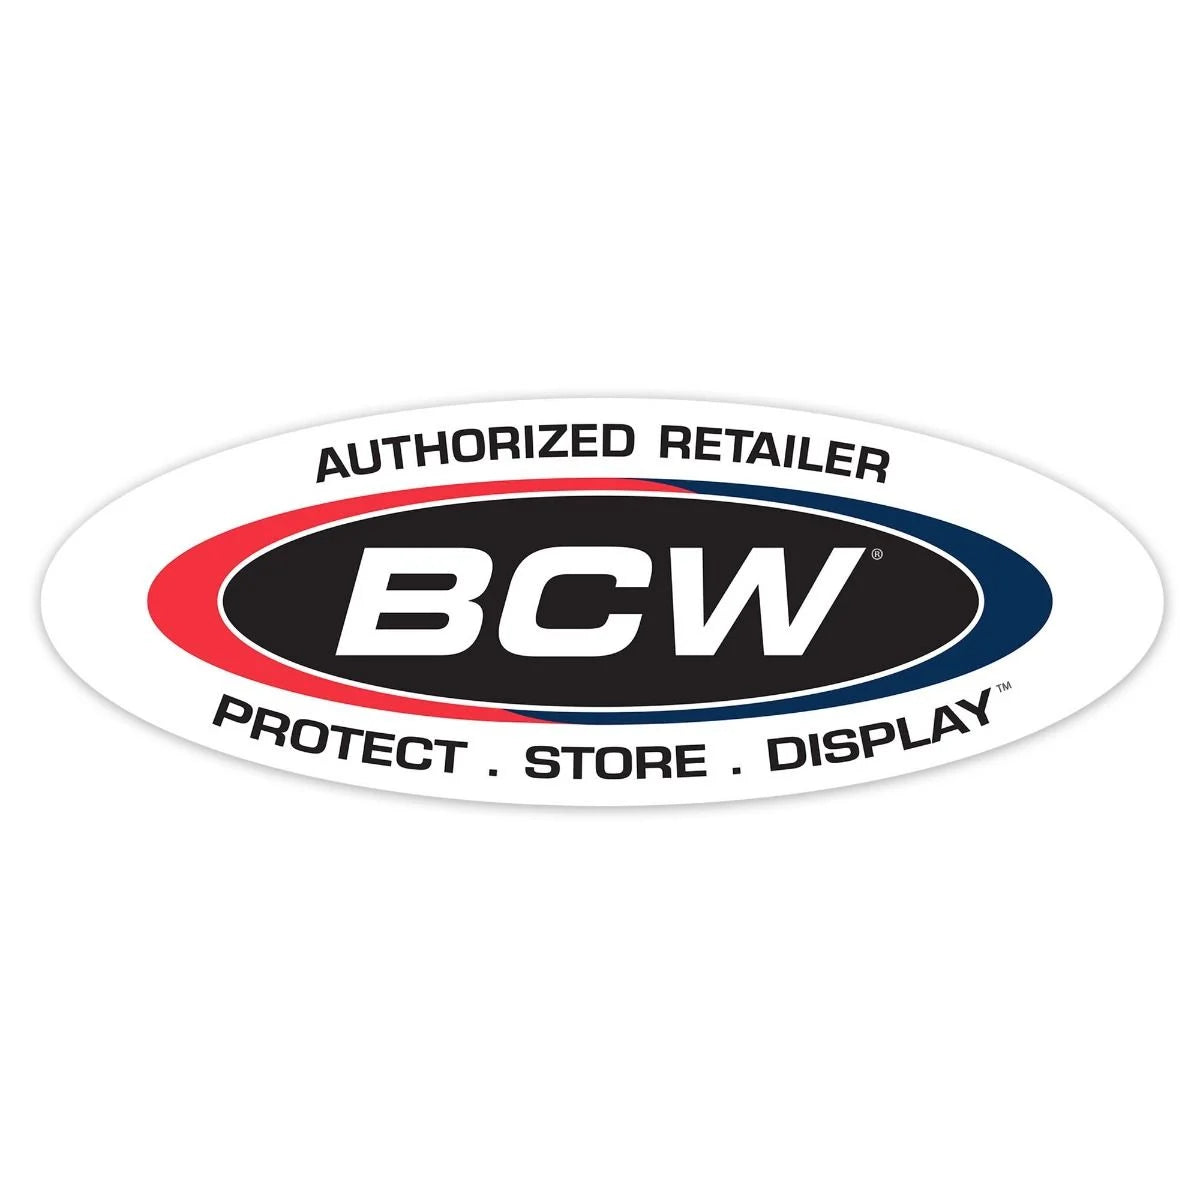 BCW - Card Sleeves (100ct) - Standard size (2 5/8'' x 3 5/8'')